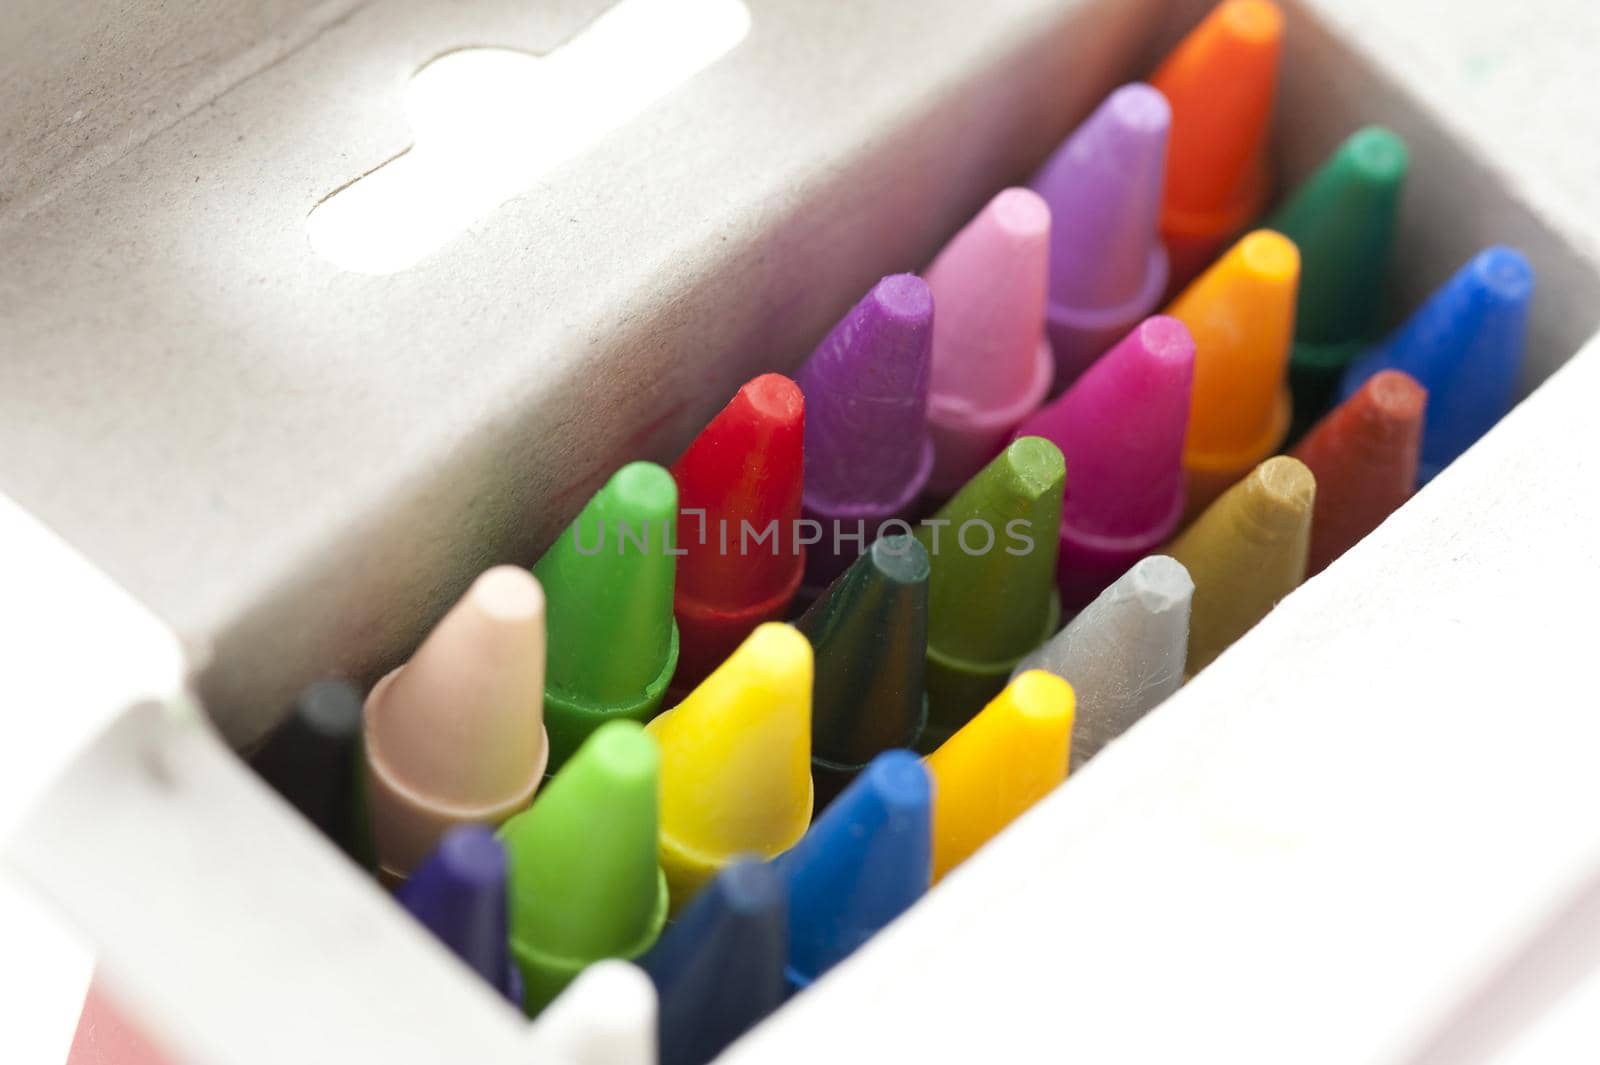 Box full of colored wax crayons by sanisra